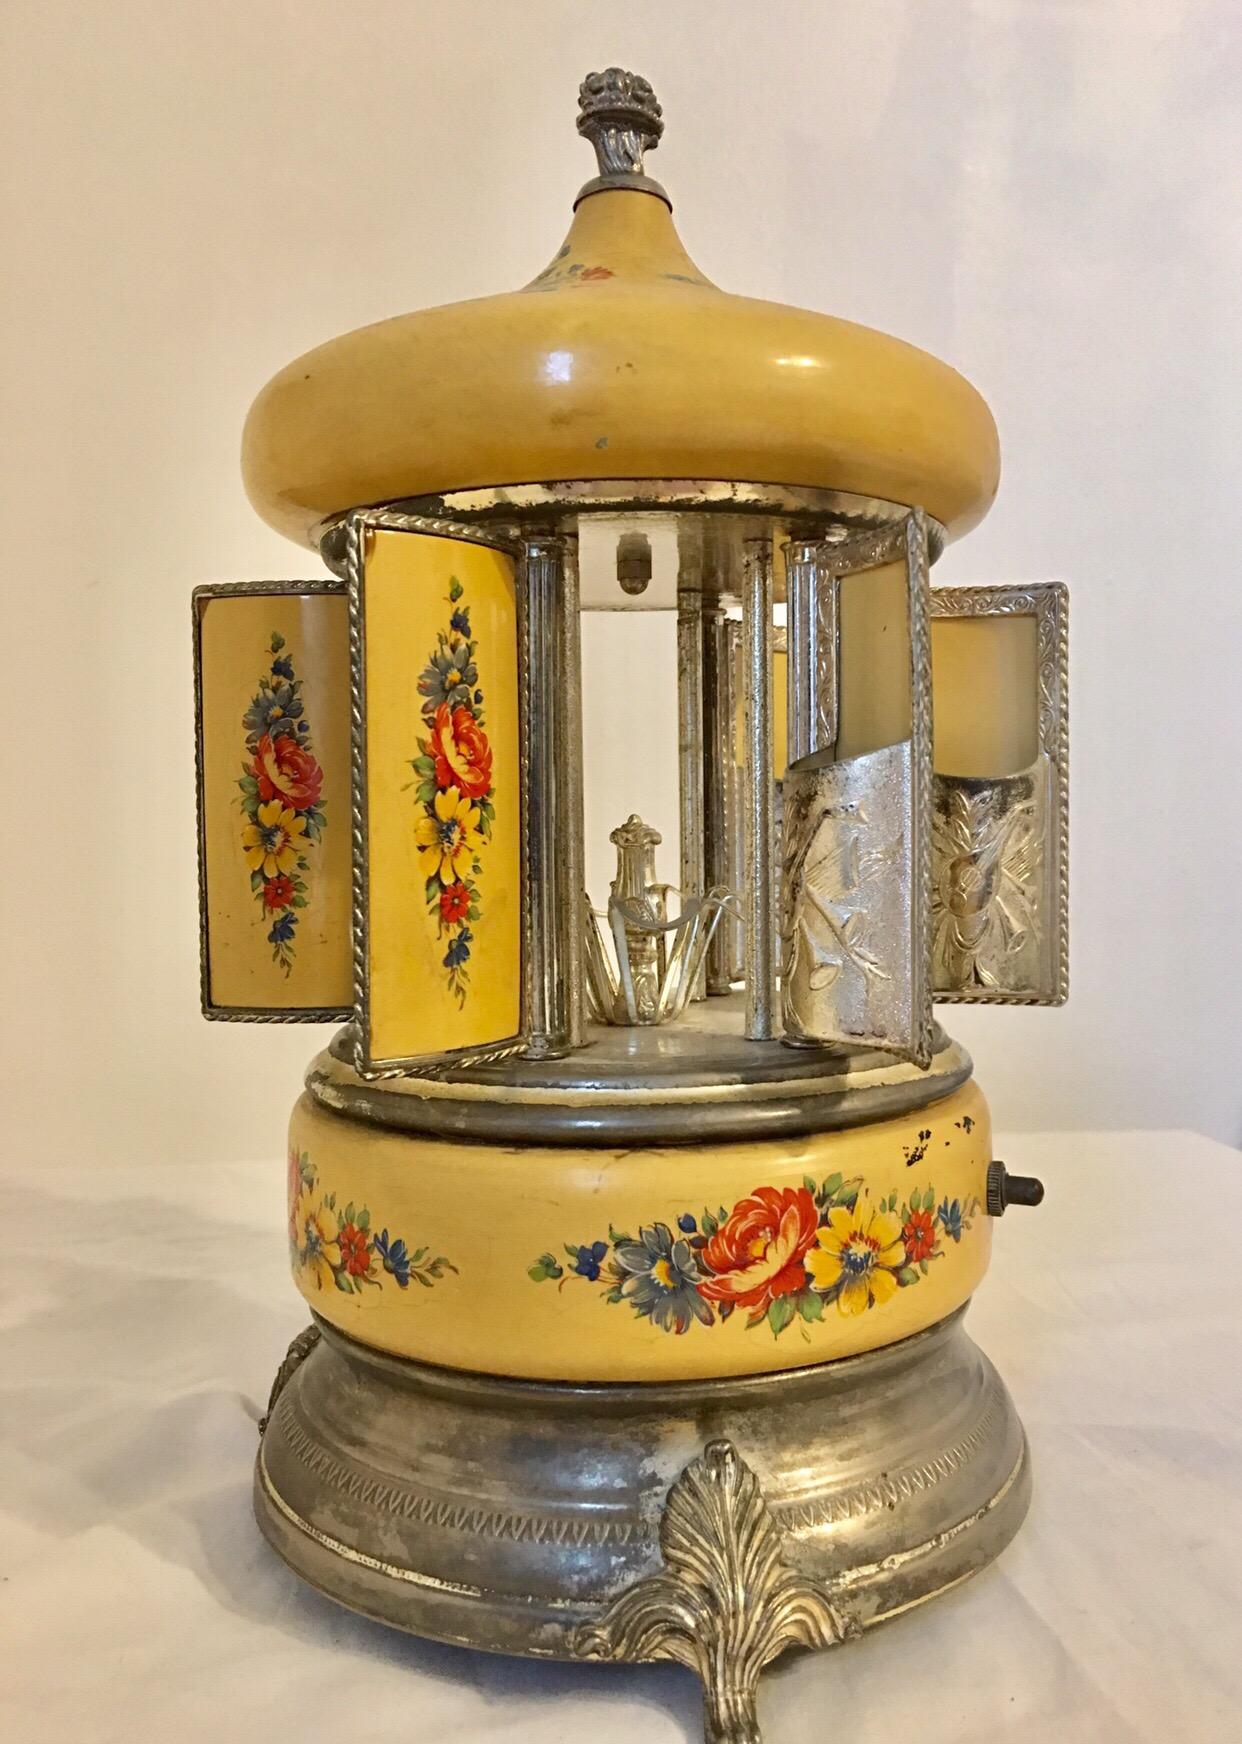 This beautiful automation and musical cigarette holder is in good working condition. The hand painted metal panel has some worn and tarnished as shown on the photos. Please study the photos carefully as form part of the description.